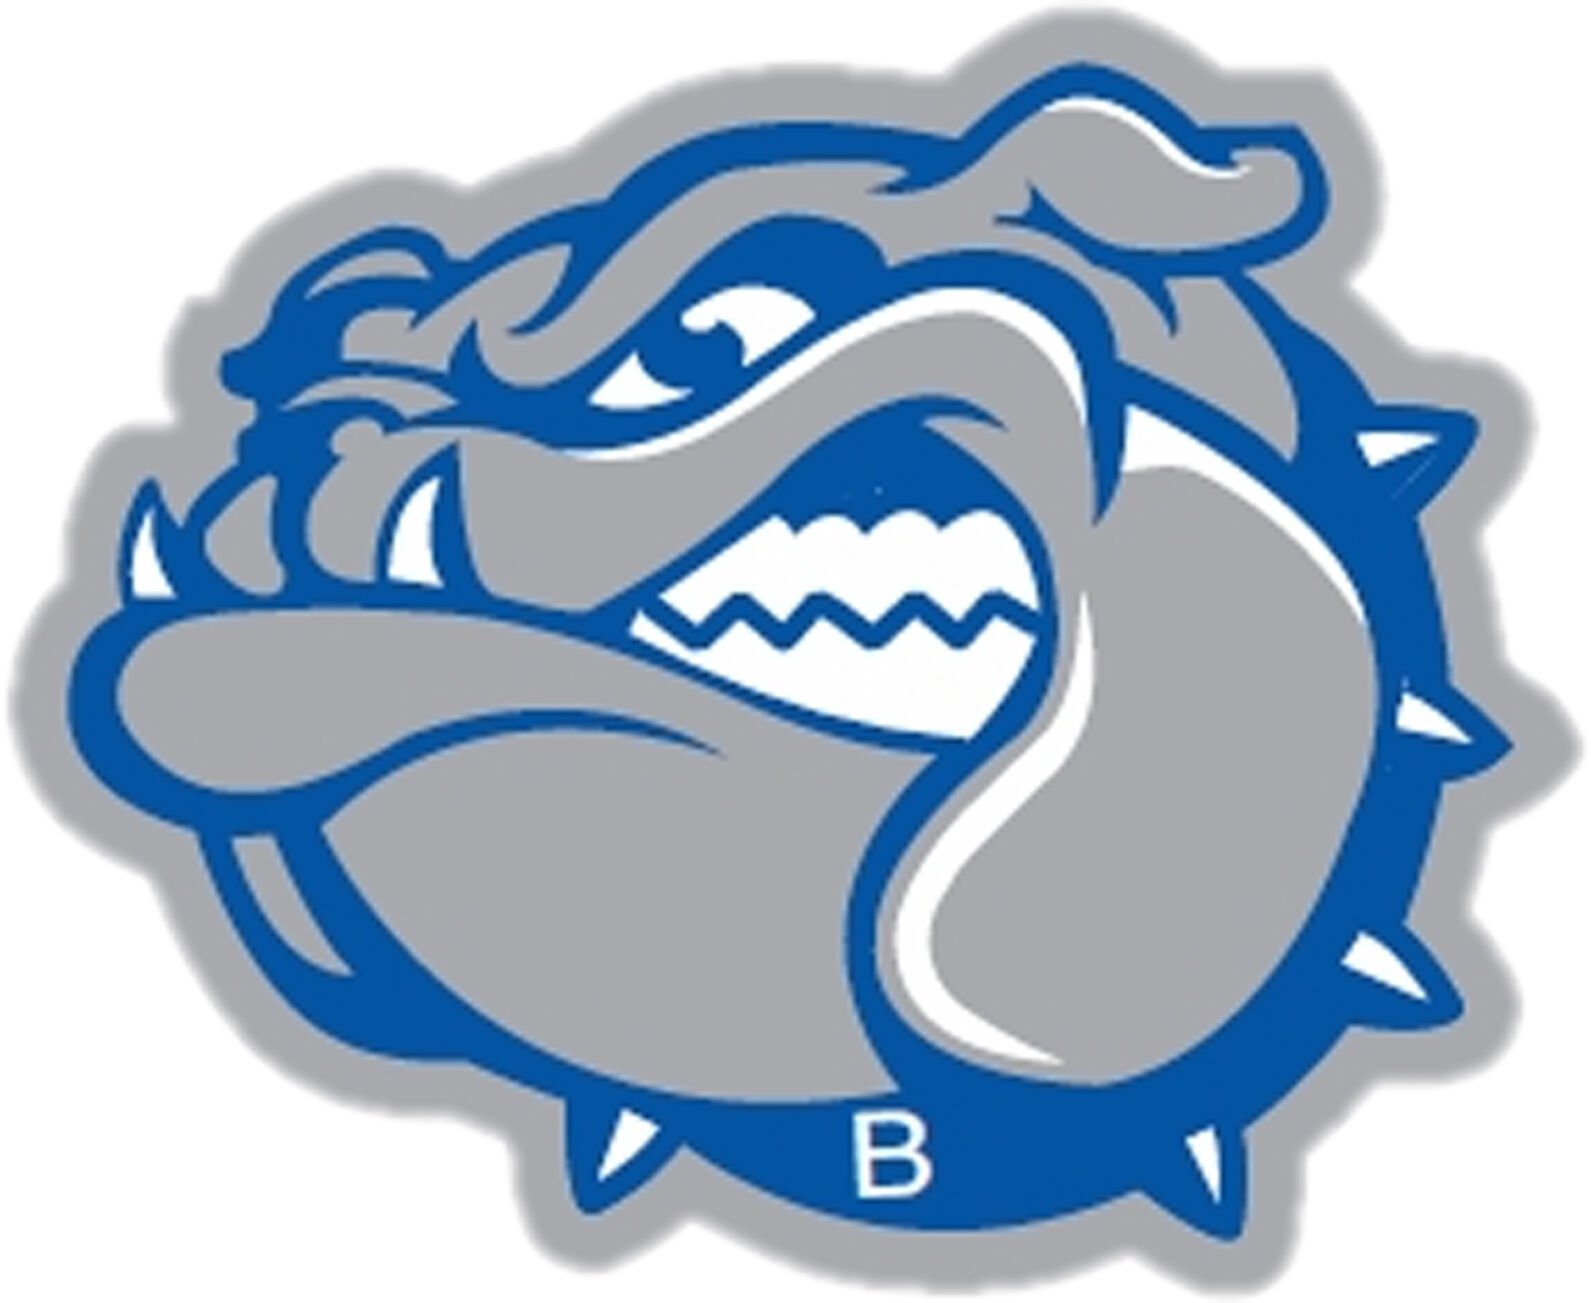 Batesville Bulldogs Win 3-Team Golf Match Over Greensburg Pirates and Franklin County Wildcats